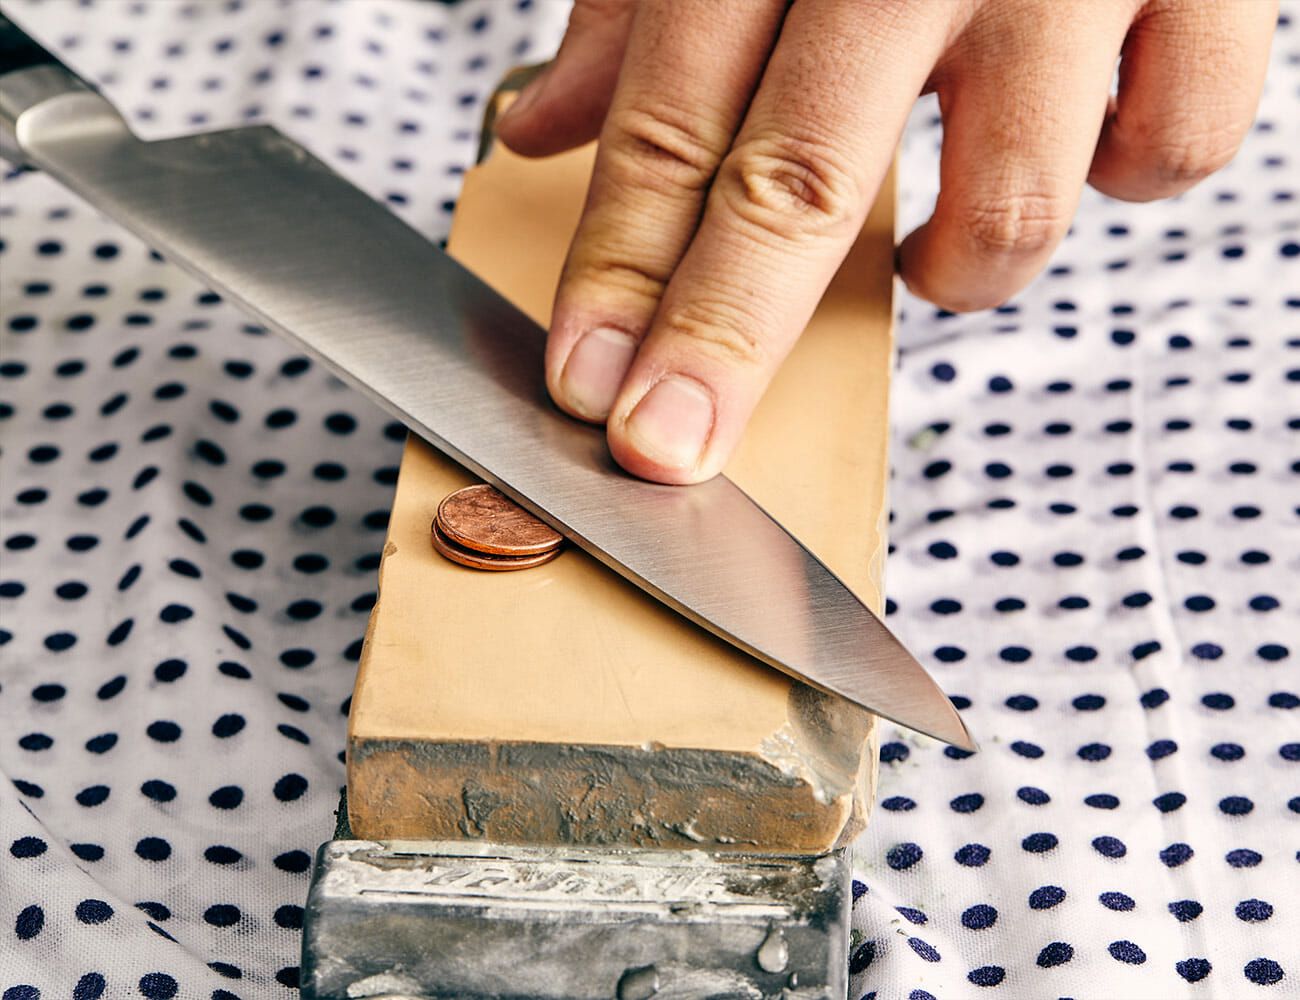 How to Sharpen Kitchen Knives Right Way